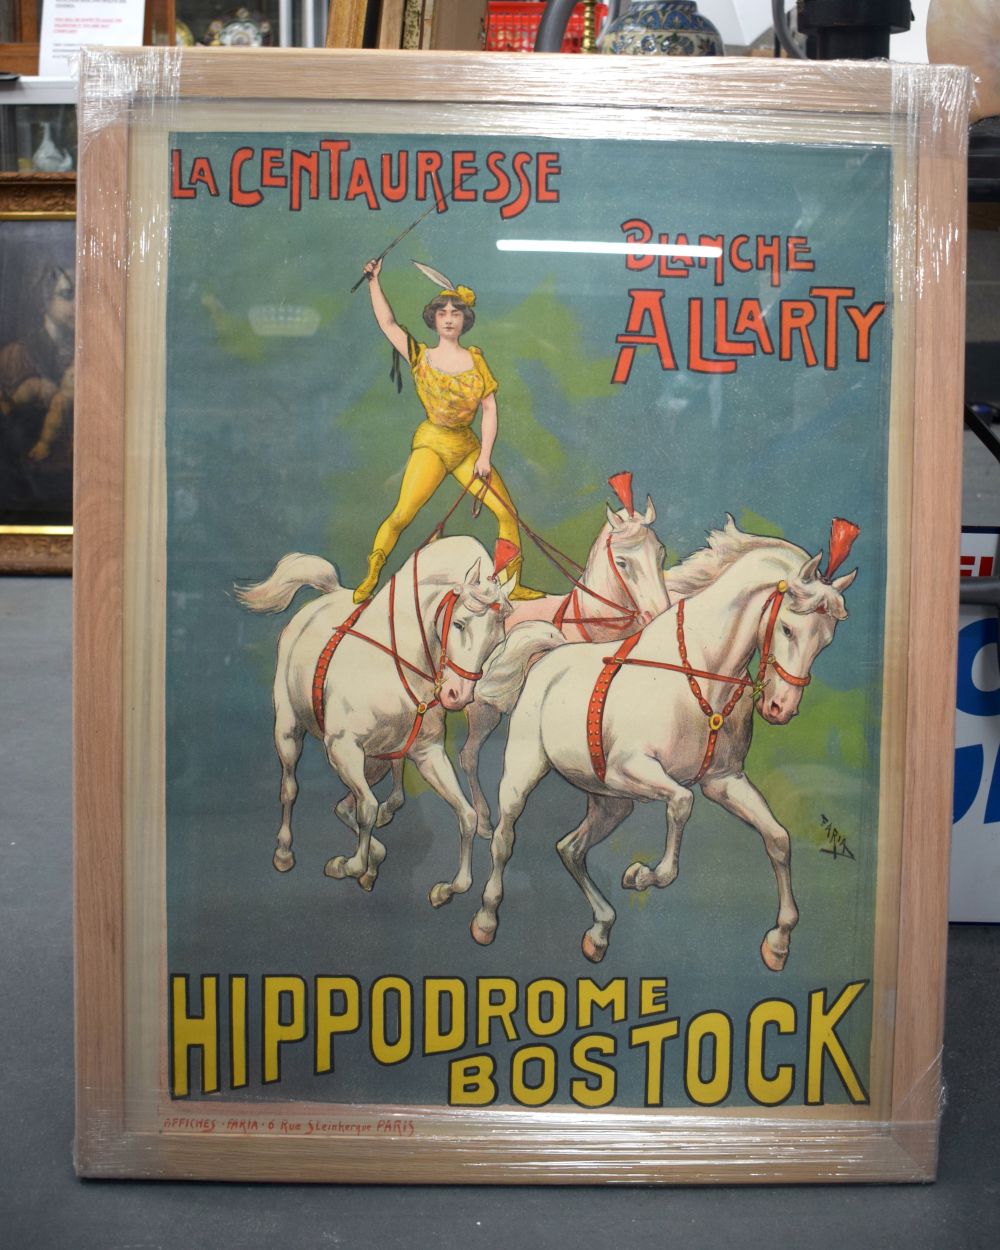 AN ANTIQUE FRENCH CIRCUS POSTER C1900. Image 75 cm x 58 cm.